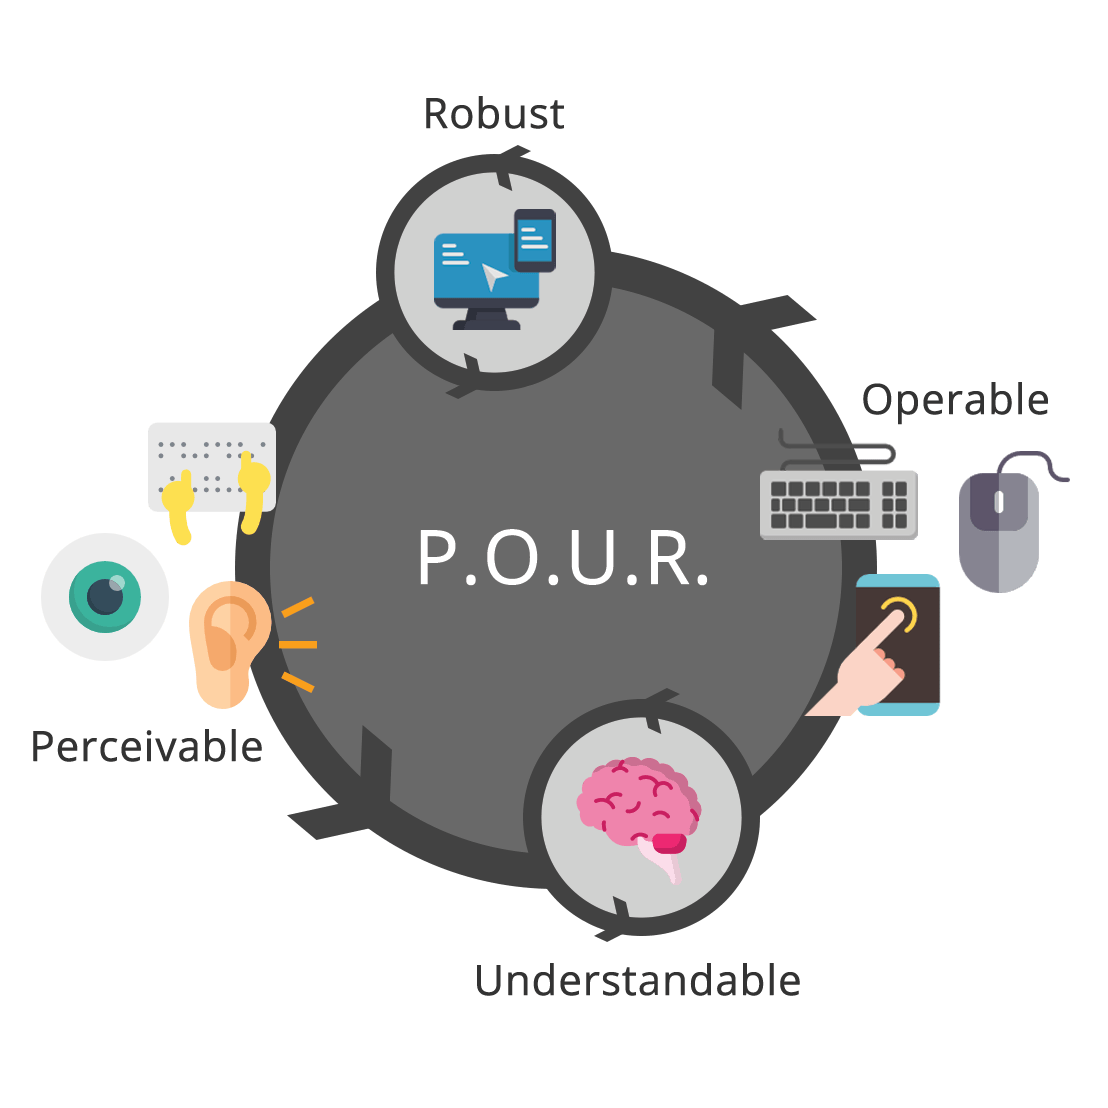 Drawing showing the relationship between the P.O.U.R. principles – Perceivable, Operable, Understandable, and Robust.